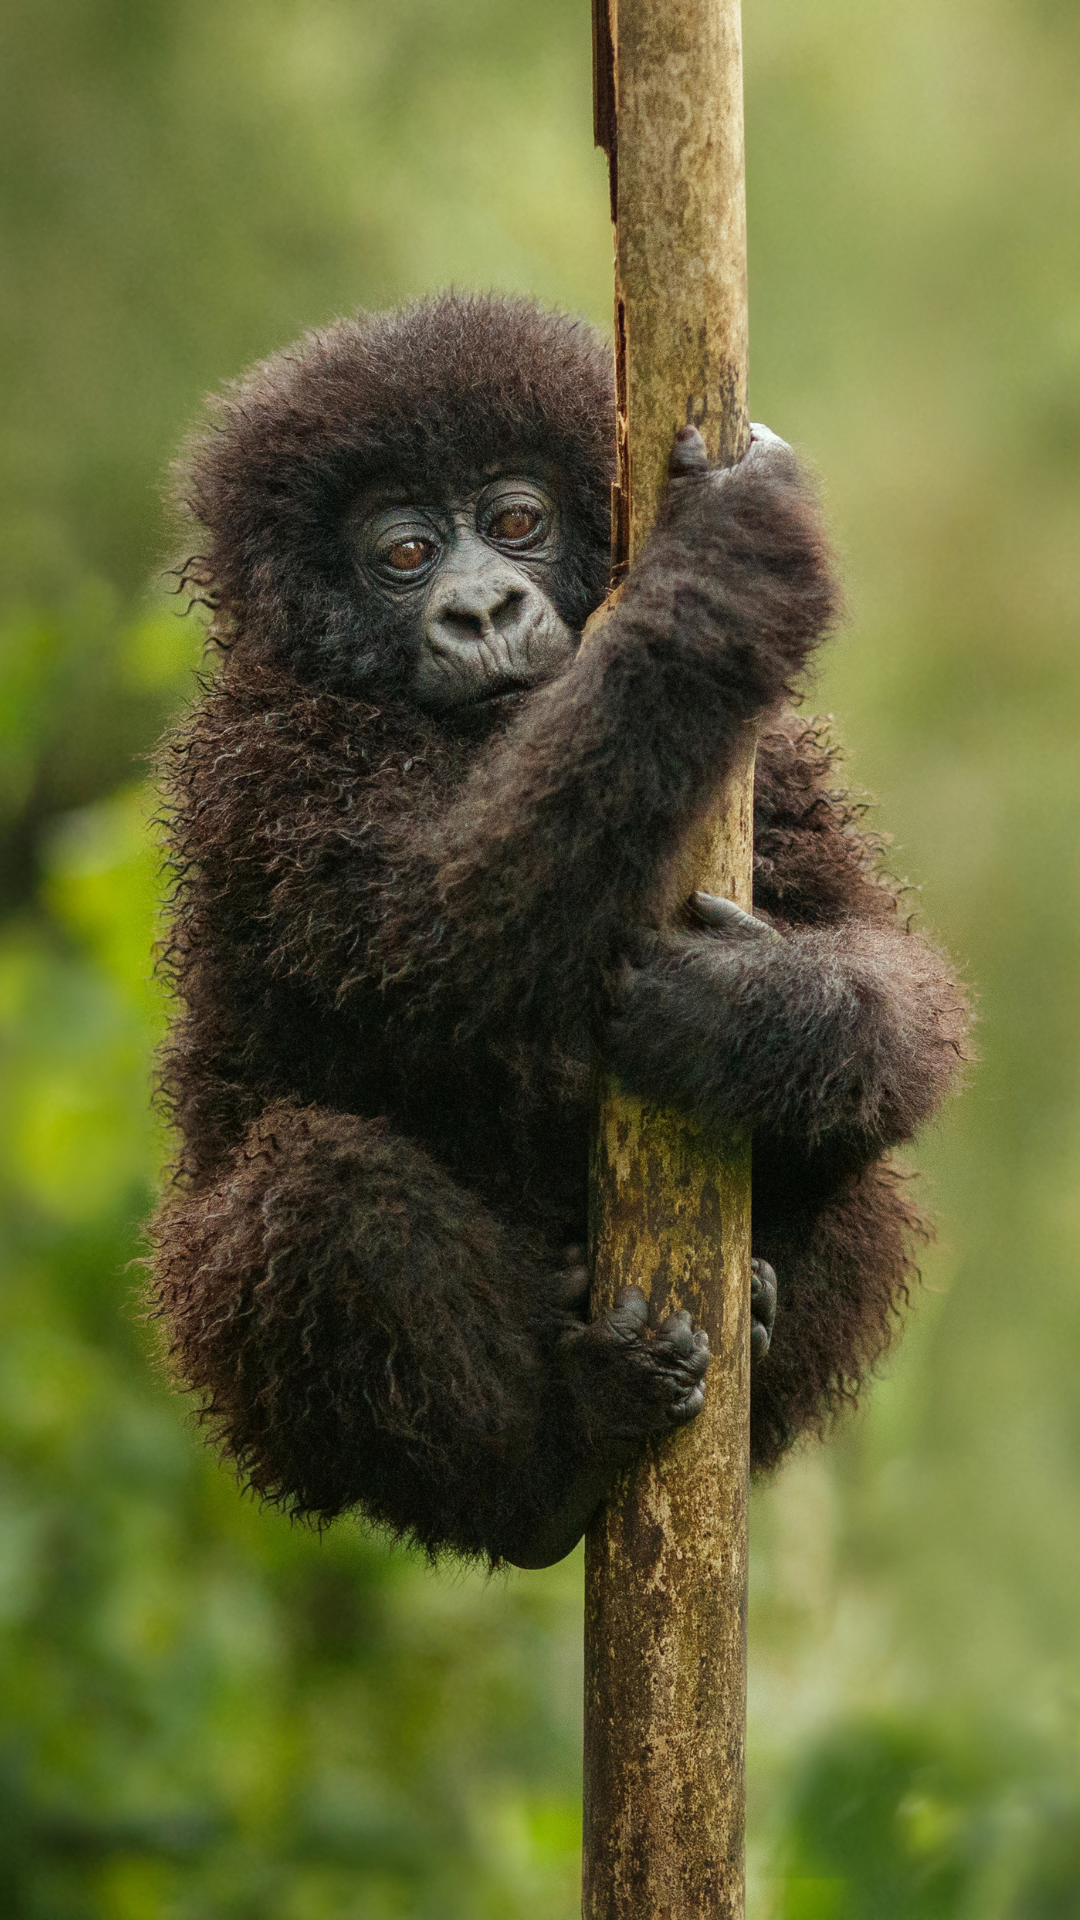 Baby Gorilla holding onto a branch